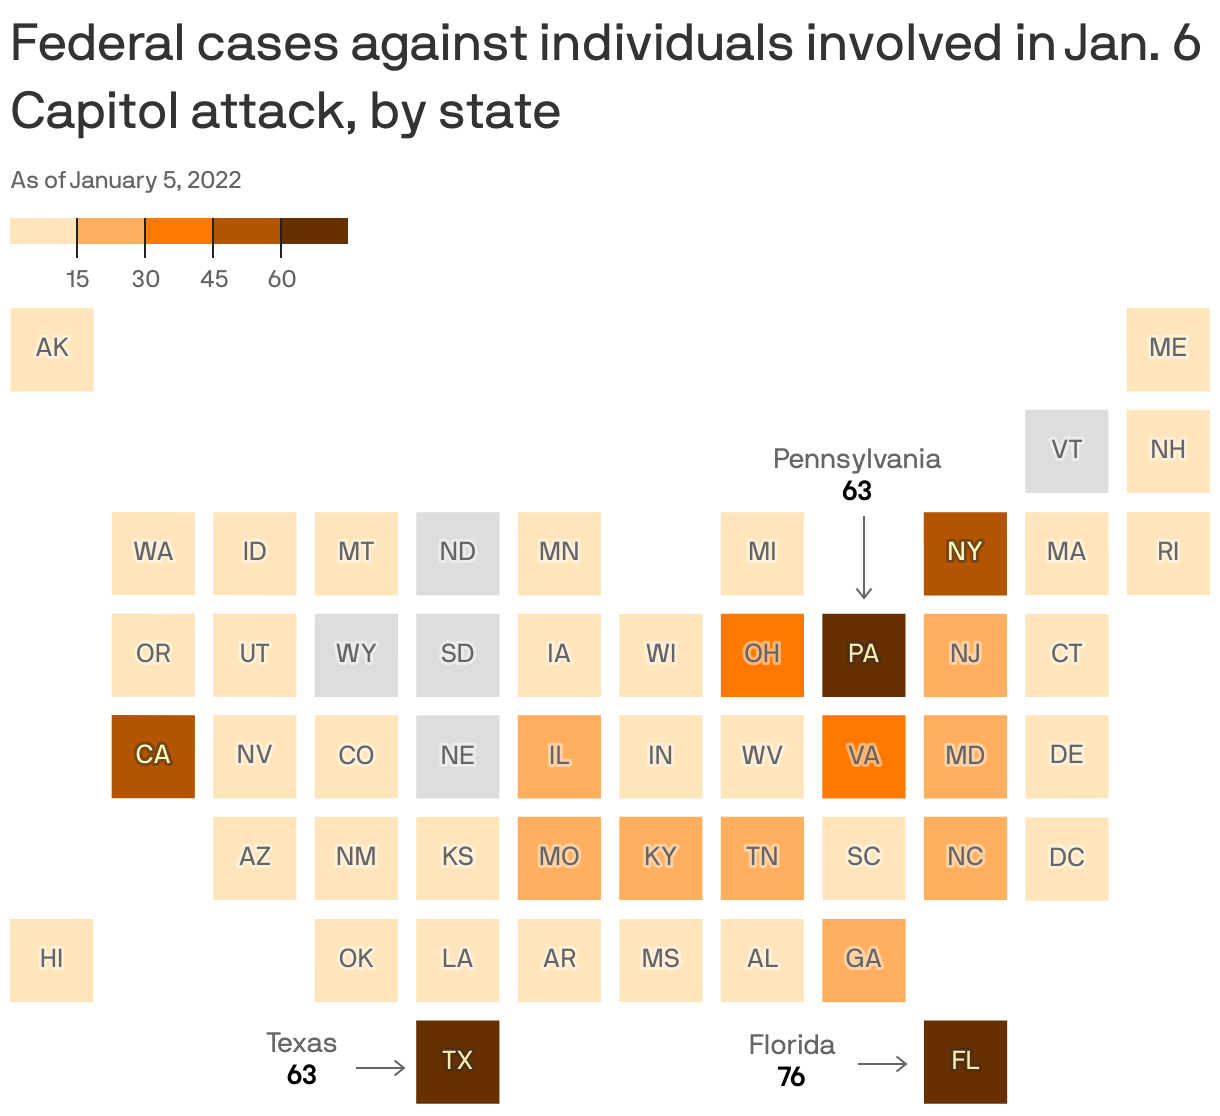 Federal cases against individuals involved in Jan. 6 Capitol attack, by state